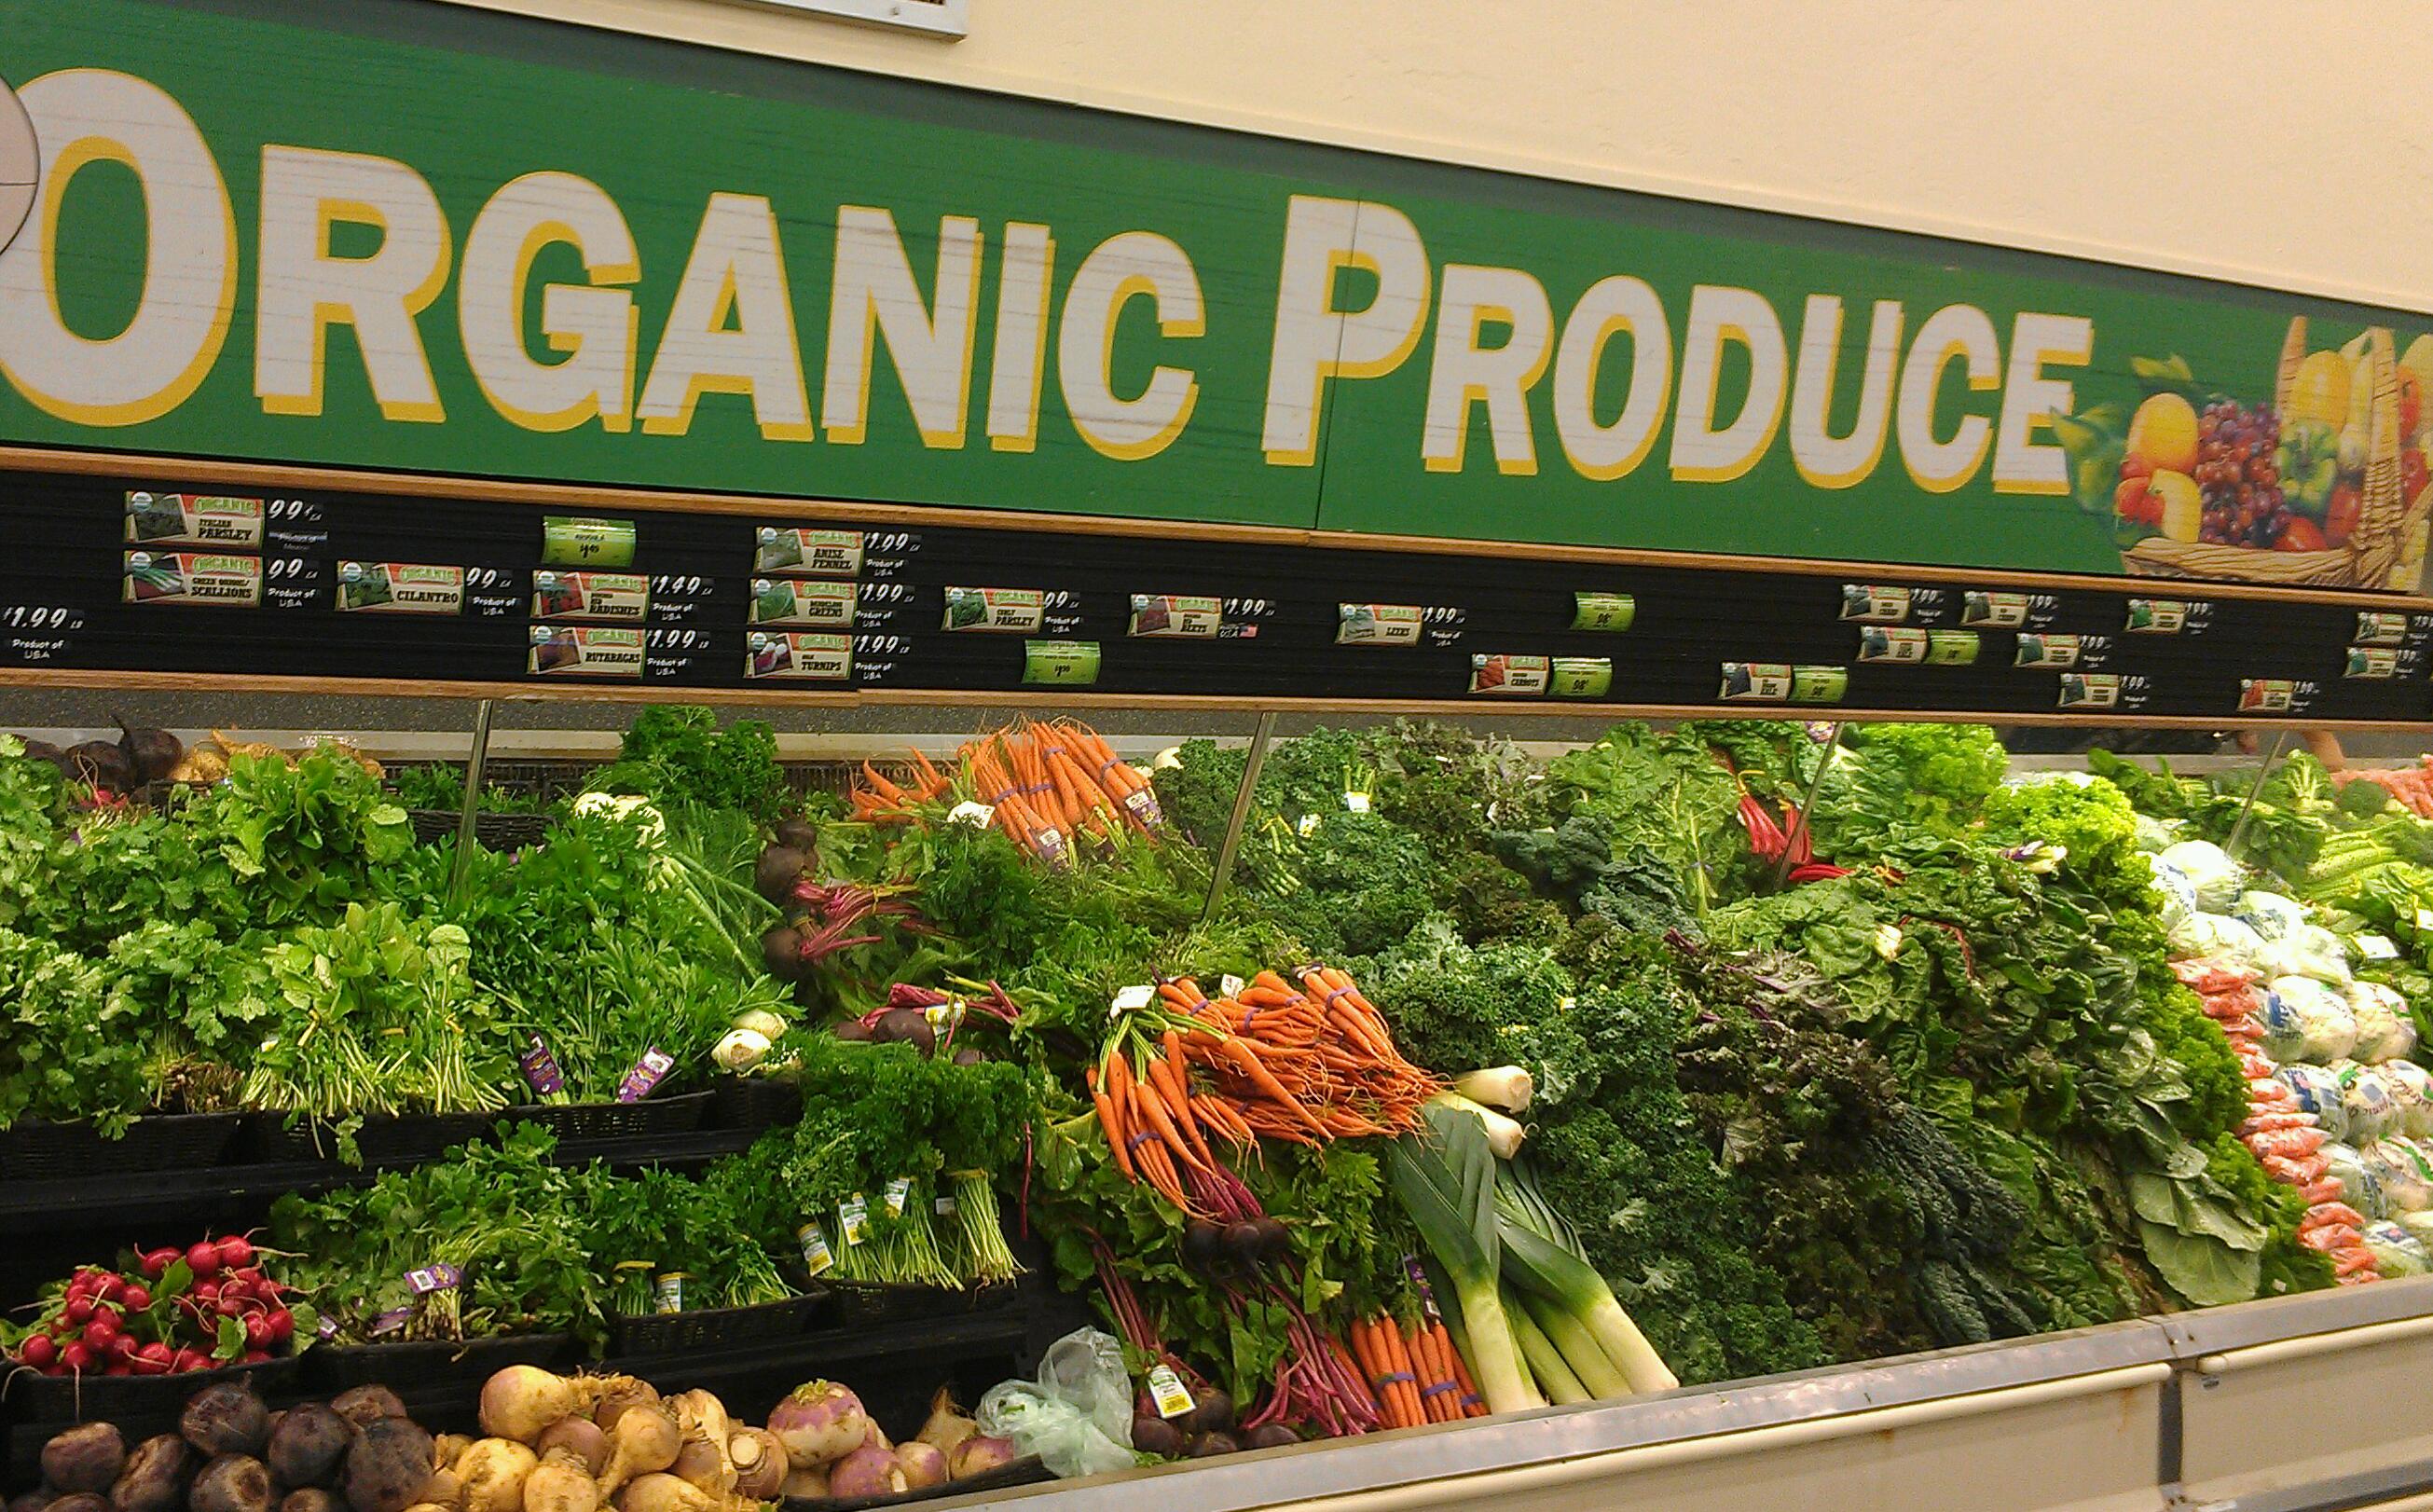 Organic Foods Have More Antioxidants and Fewer Pesticides, Study Shows